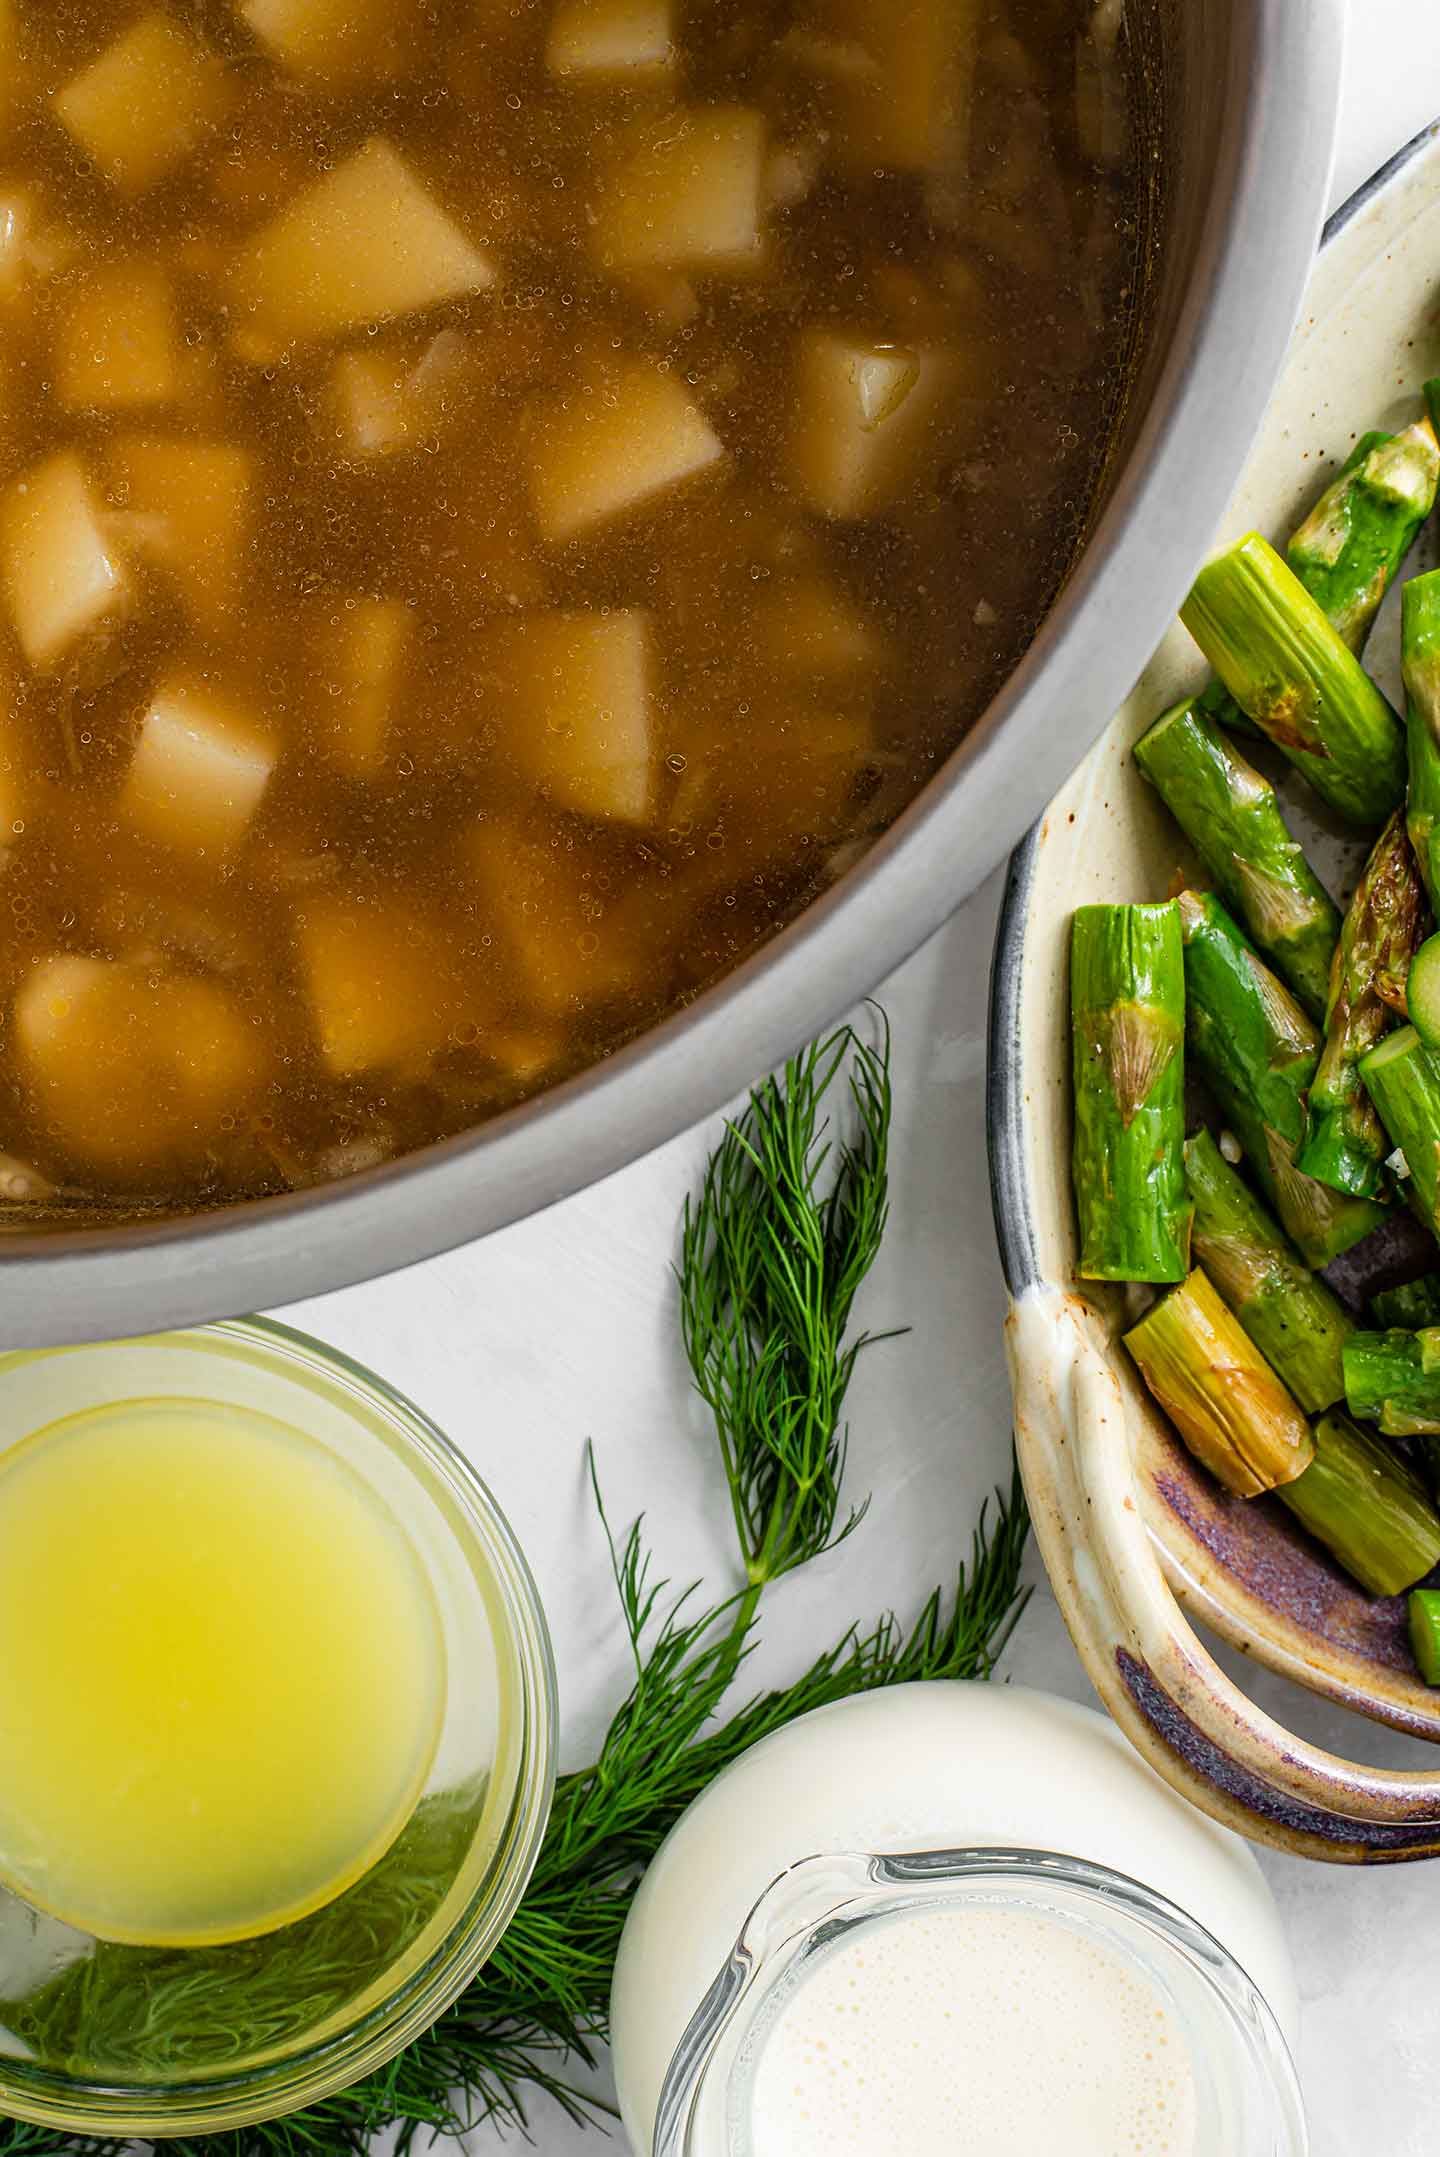 Top down view of a large pot with potatoes, beans, and veggie broth. Next to the pot is sliced roasted asparagus, lemon juice, plant milk, and fresh dill.